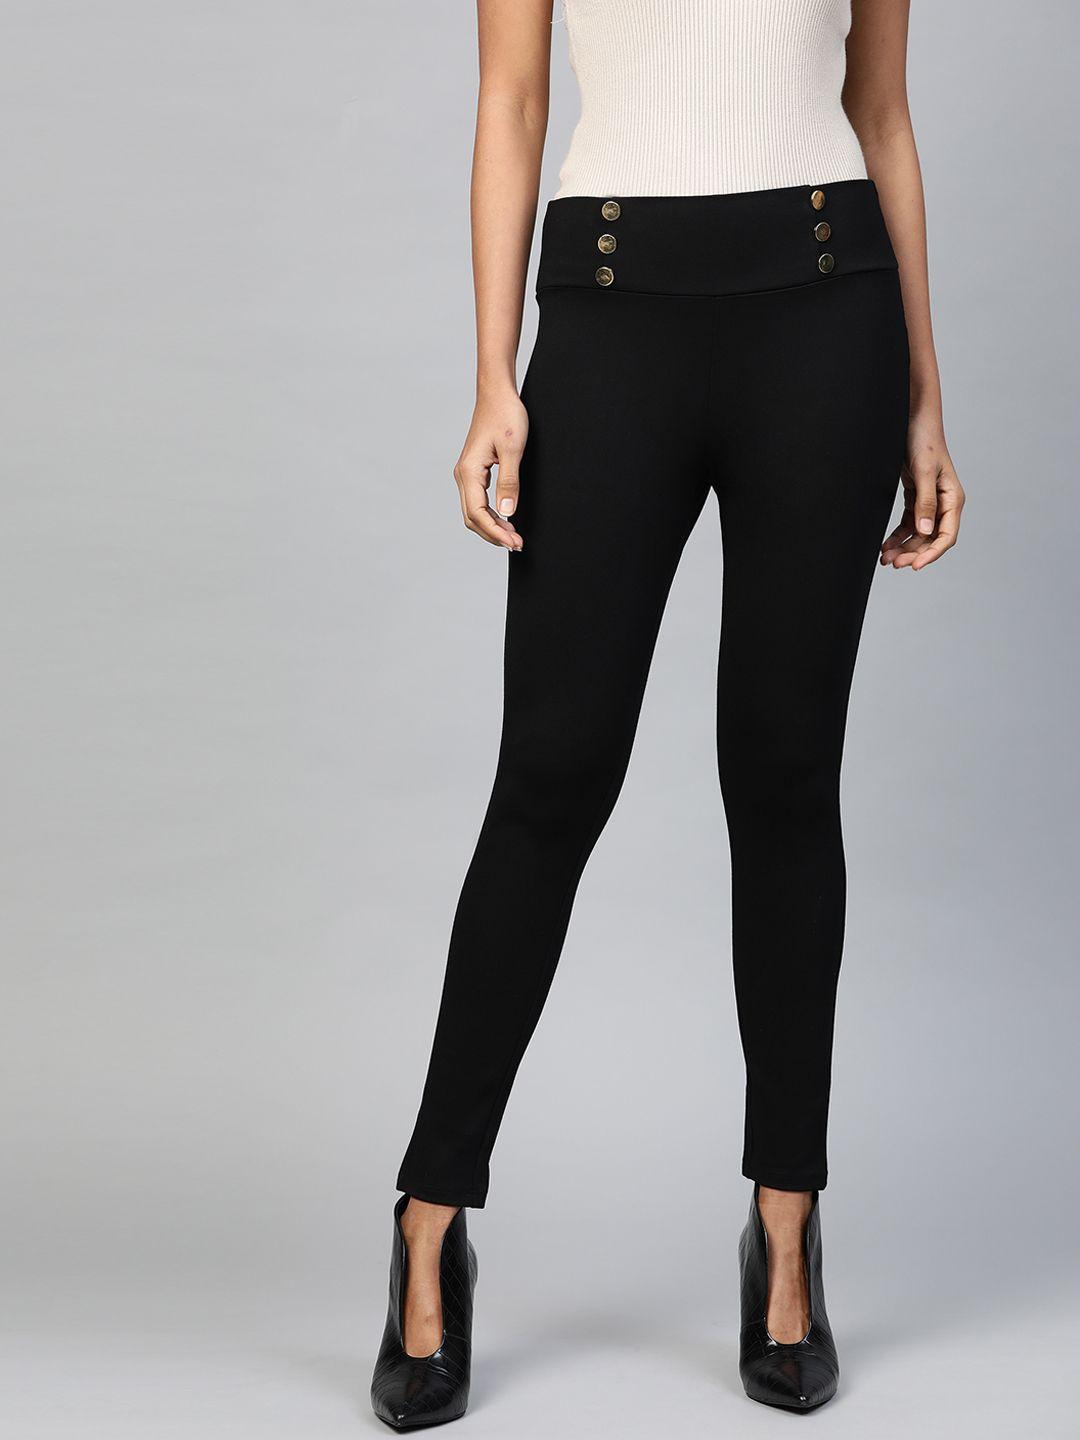 sassafras-women-black-solid-high-rise-treggings-with-button-detail